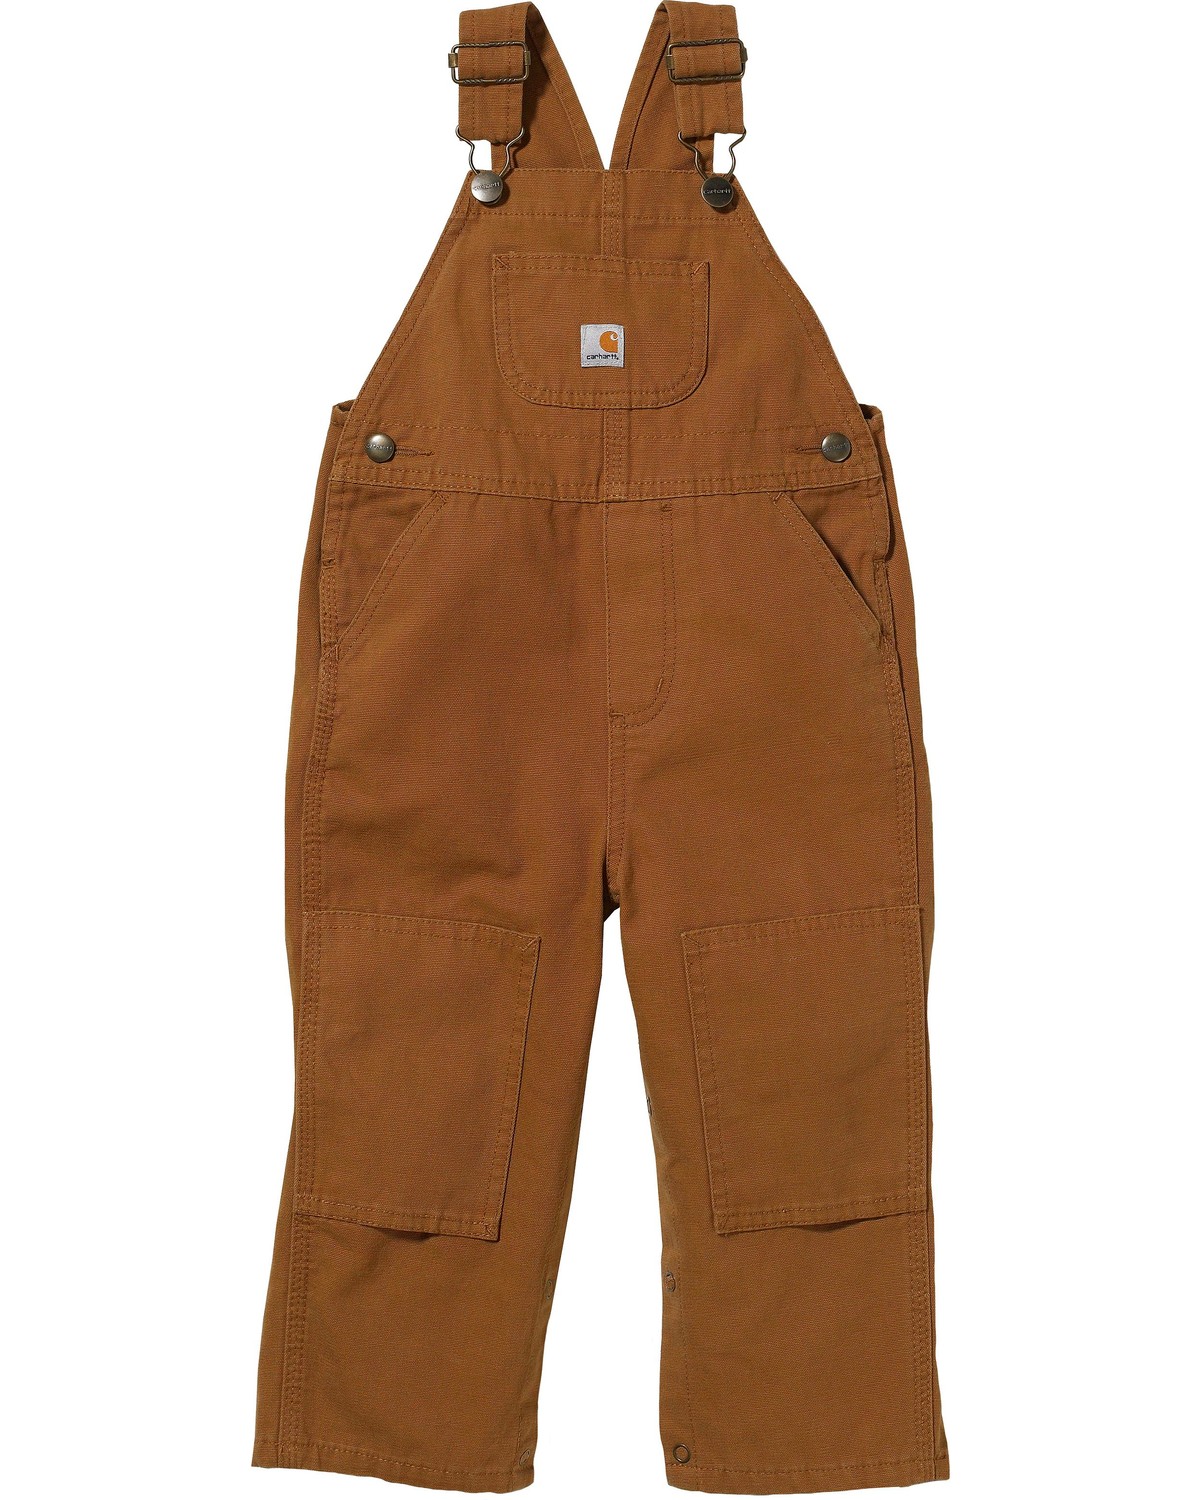 Carhartt Toddlers' Cotton Duck Overalls - 2T-4T